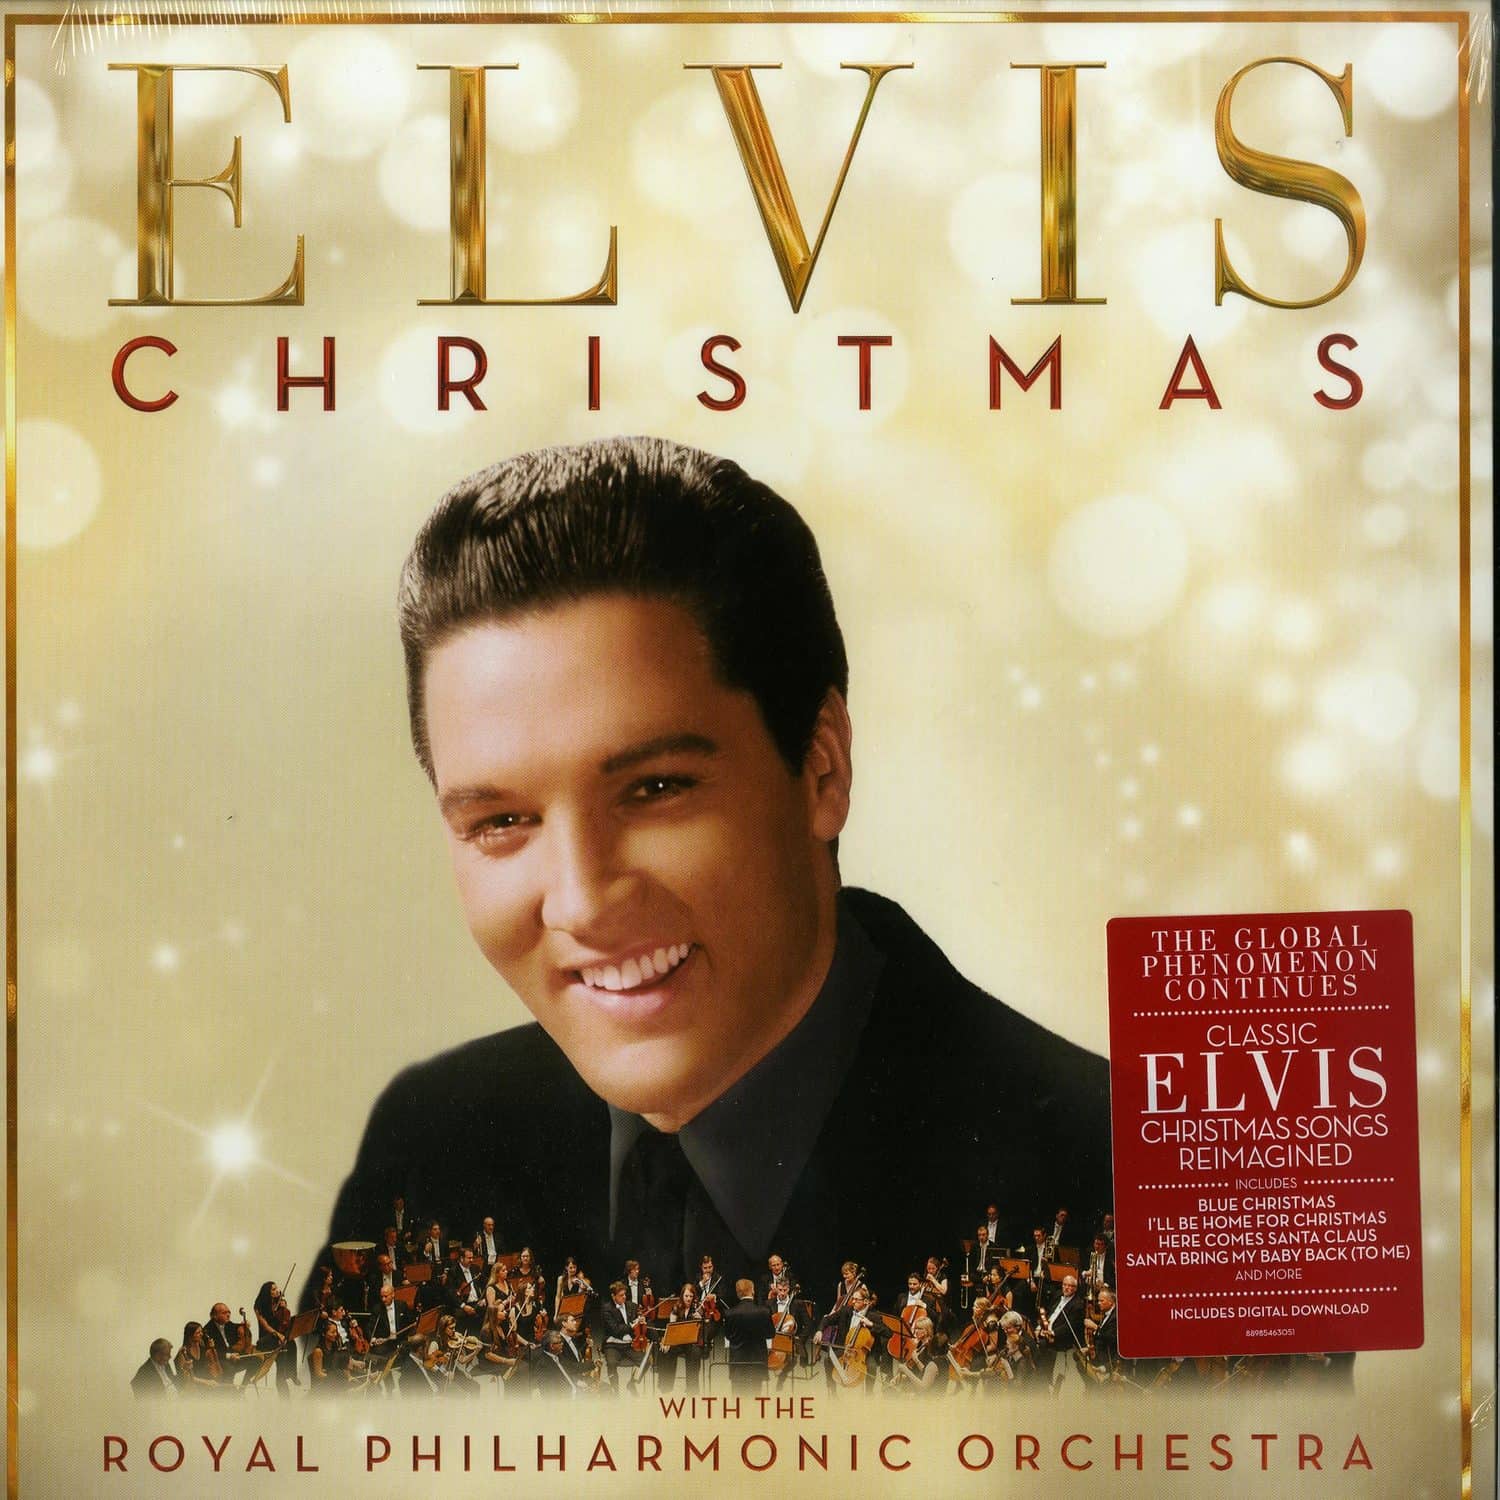 Elvis with The Royal Philharmonic Orchestra - CHRISTMAS WITH ELVIS